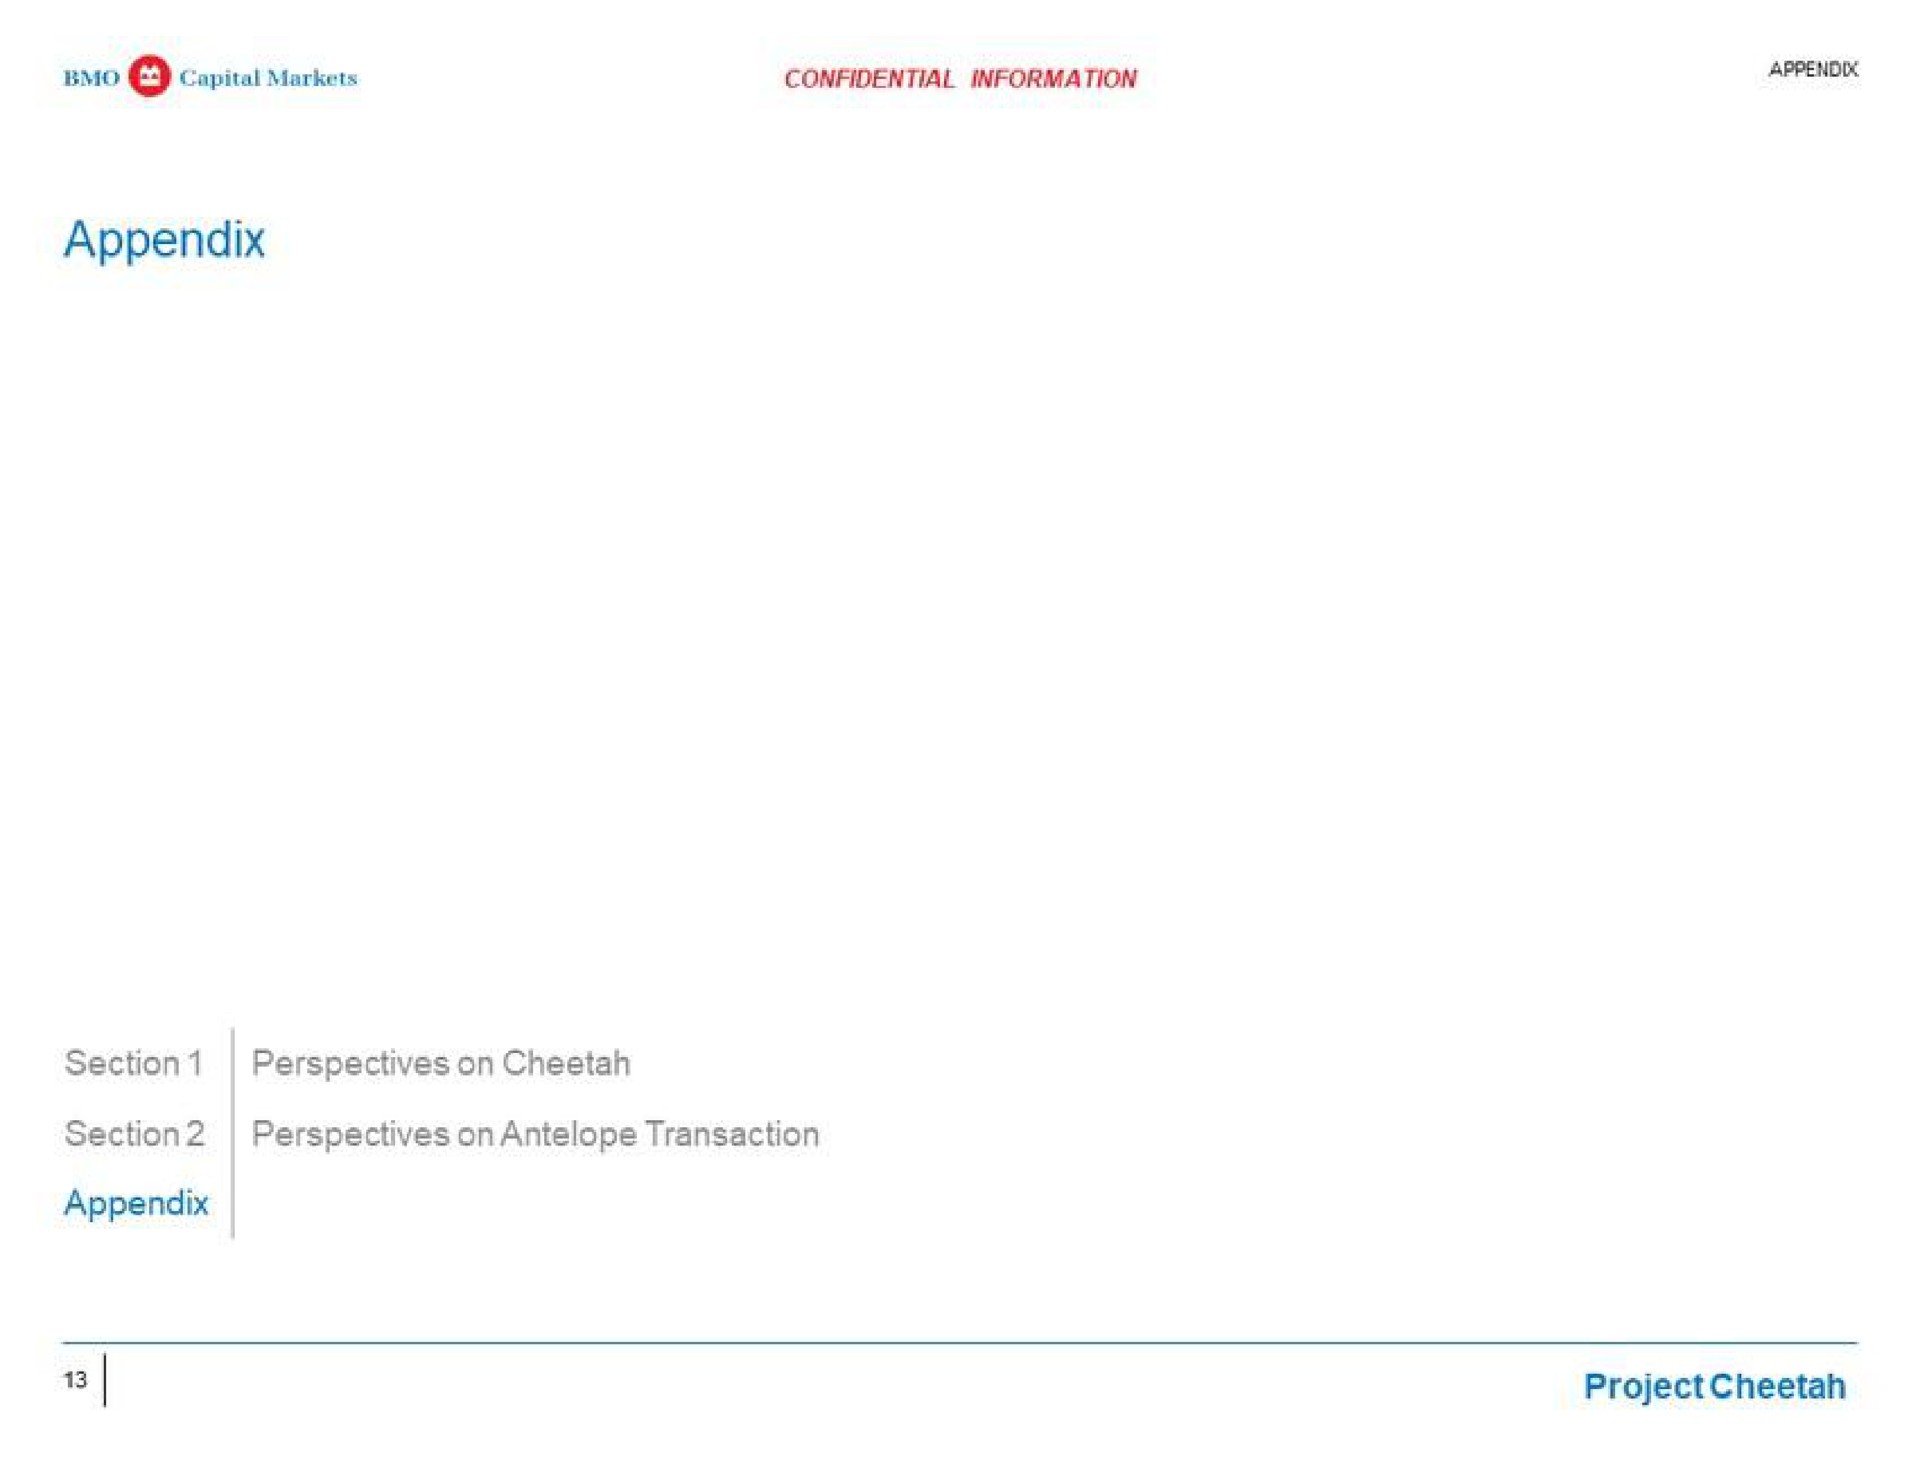 capital markets confidential information appendix section perspectives on cheetah section perspectives on antelope transaction appendix project cheetah | BMO Capital Markets